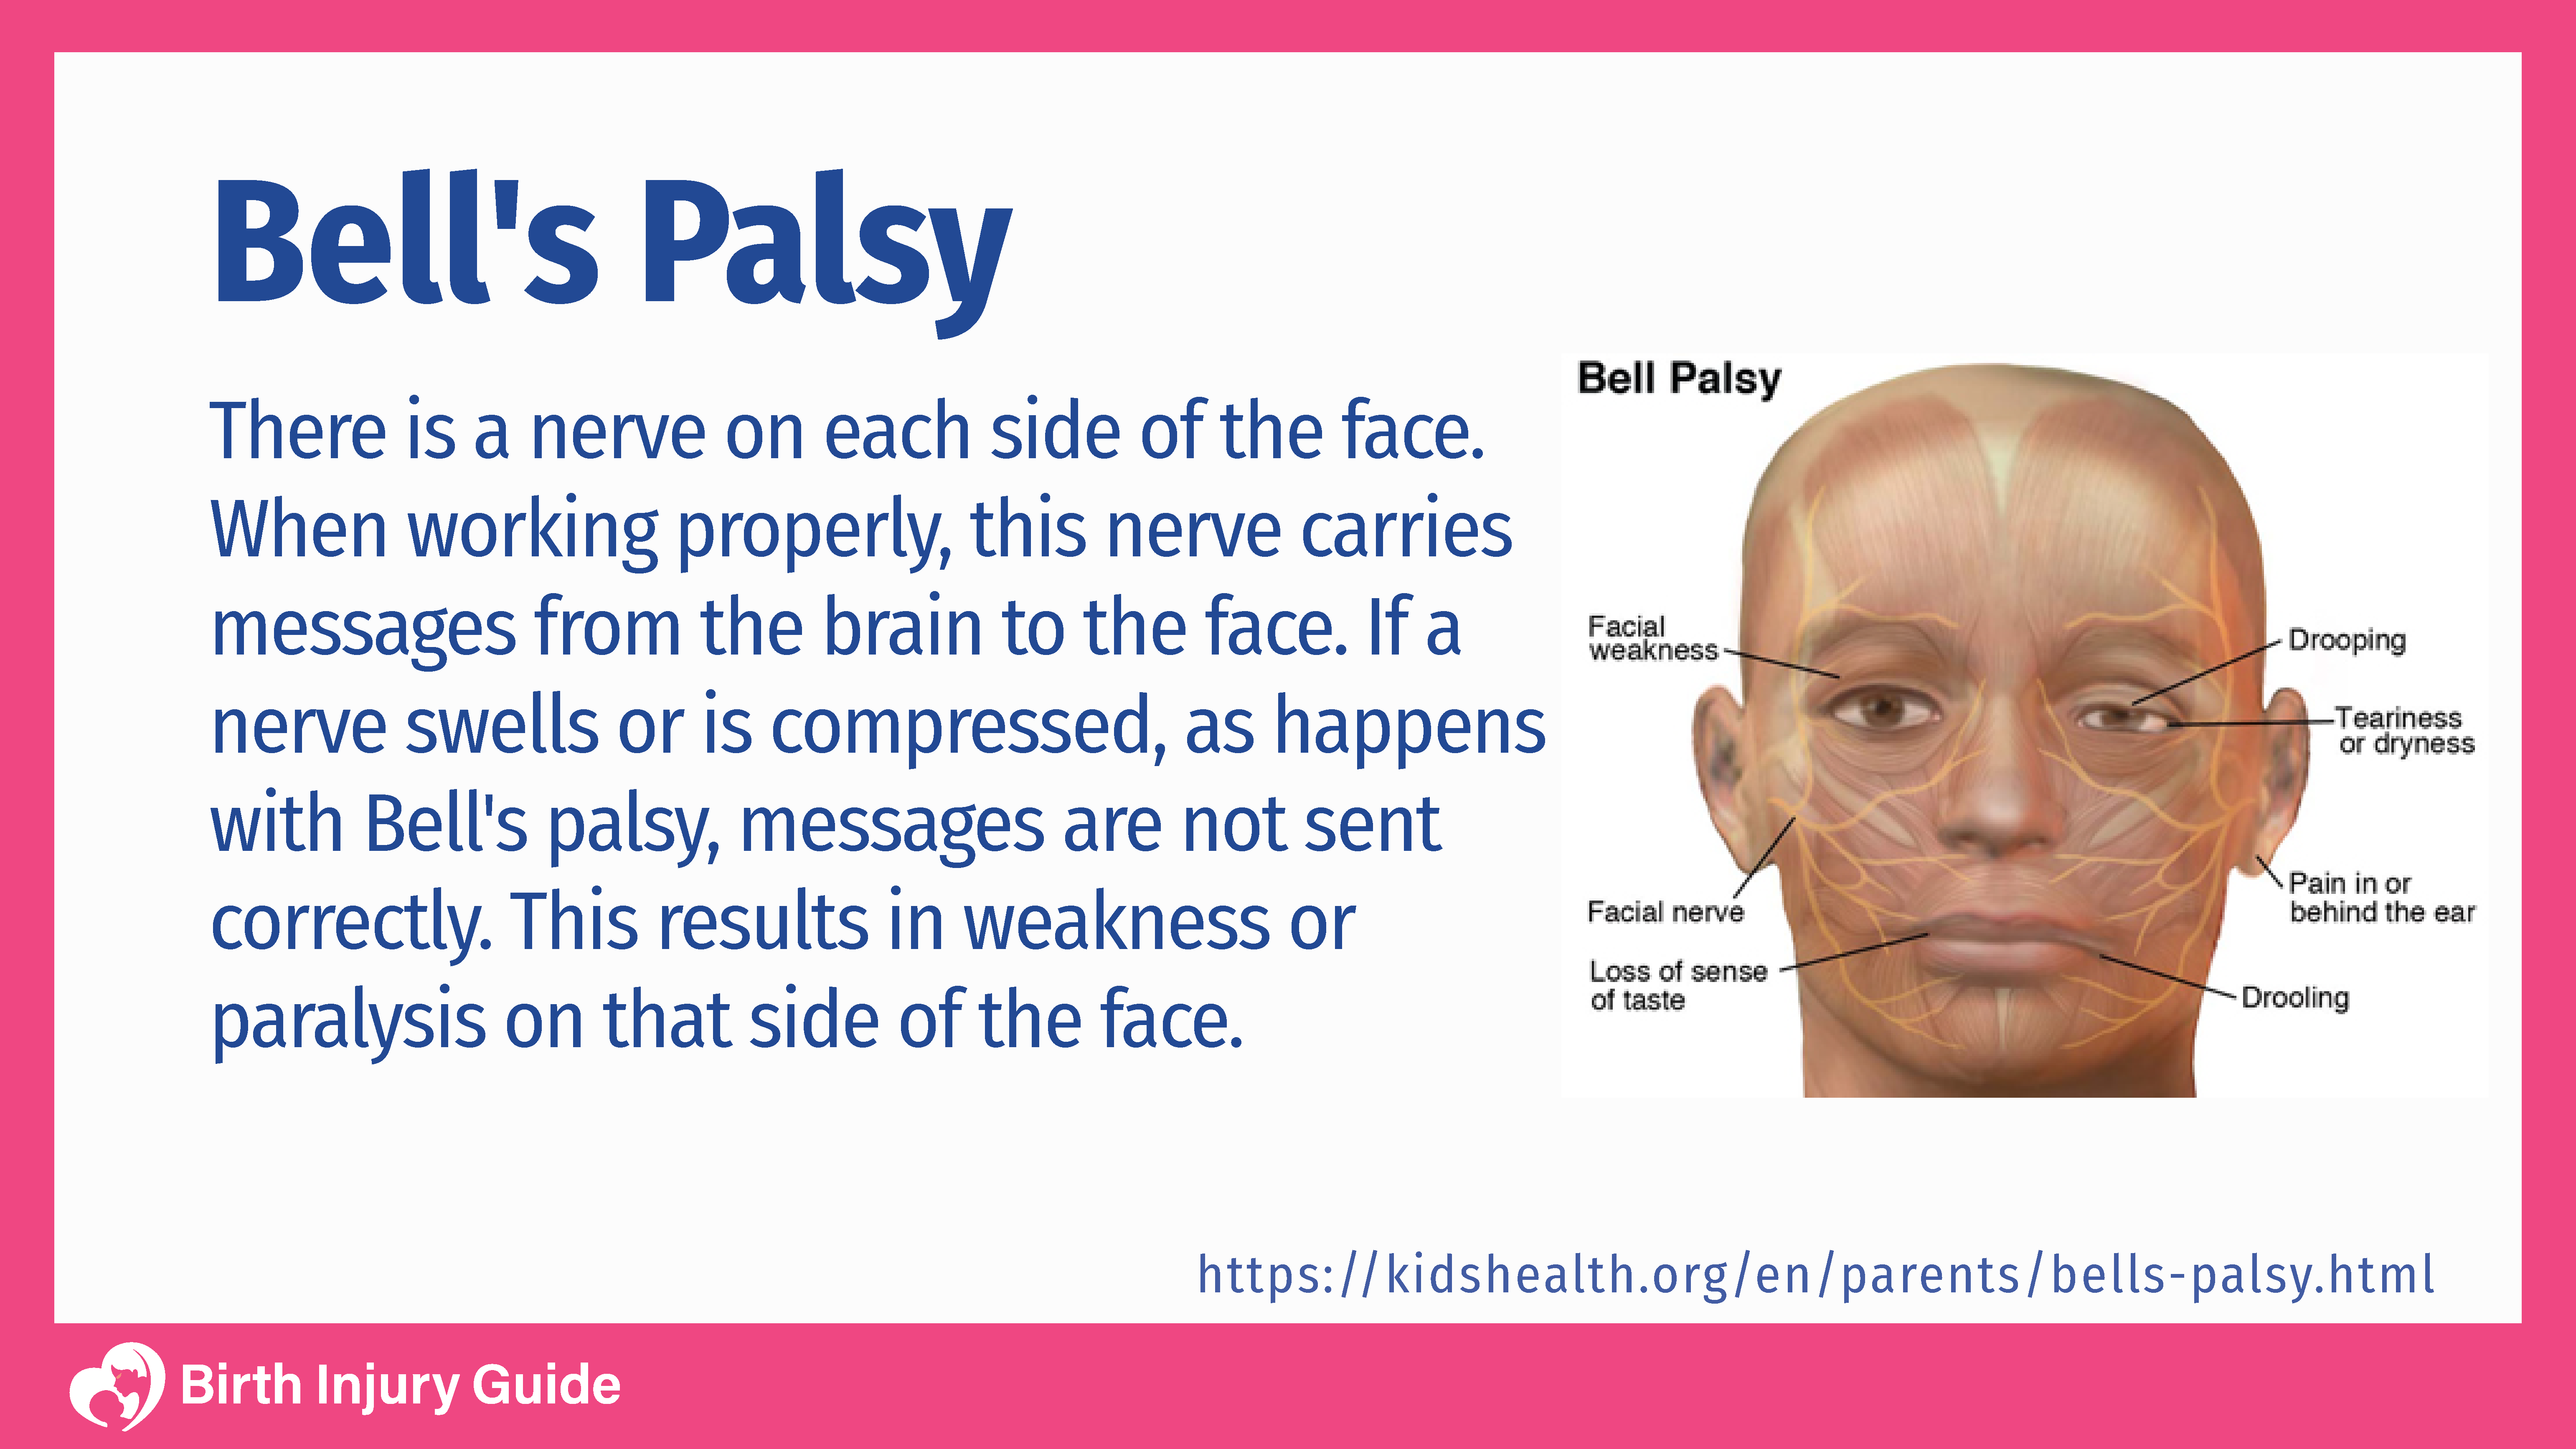 Bell's palsy